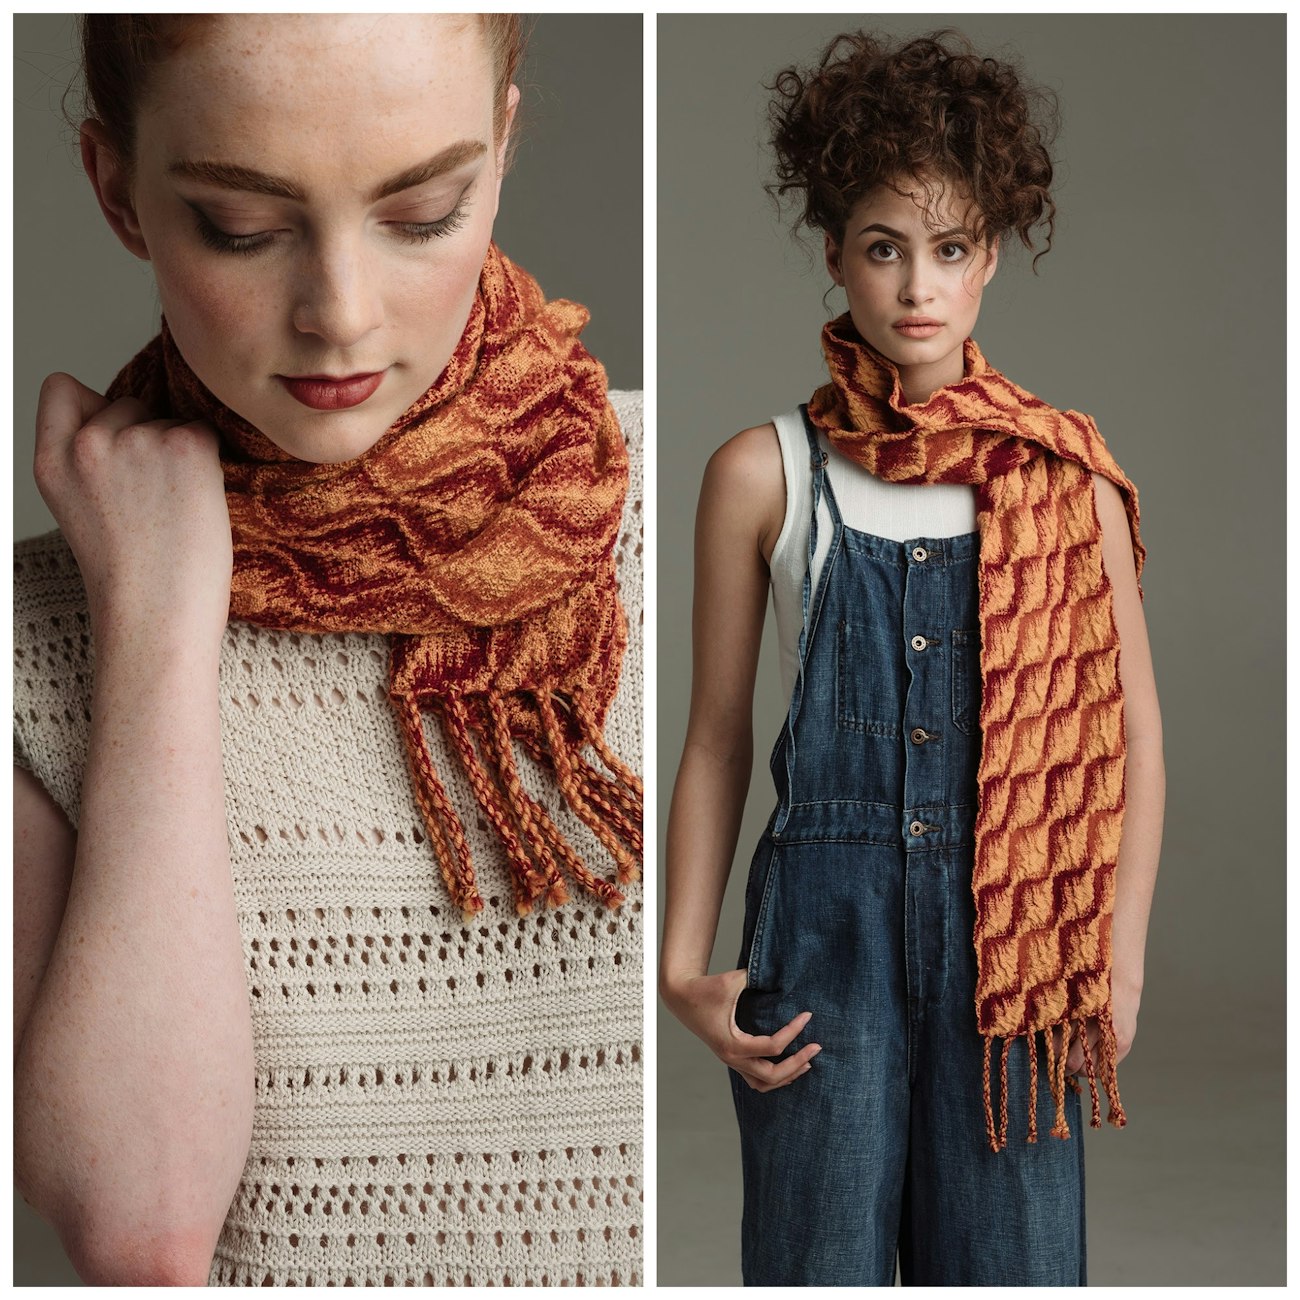 8-shaft Autumn Leaves scarf on the left; 16-shaft version on the right. Photos by Caleb Young, Good Folk Photography